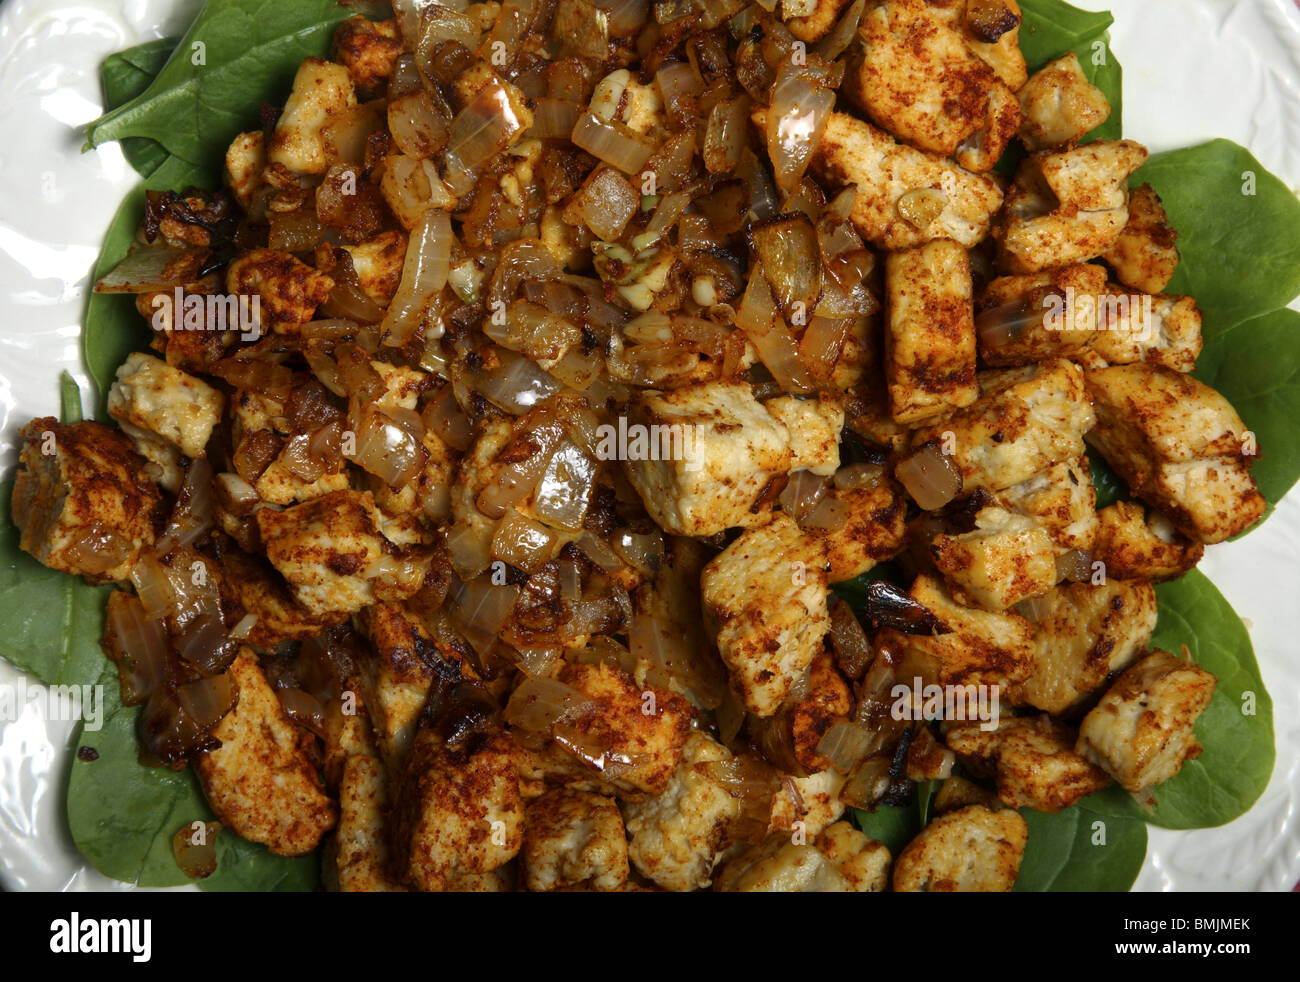 Fried Quorn, a meat substitute. Stock Photo